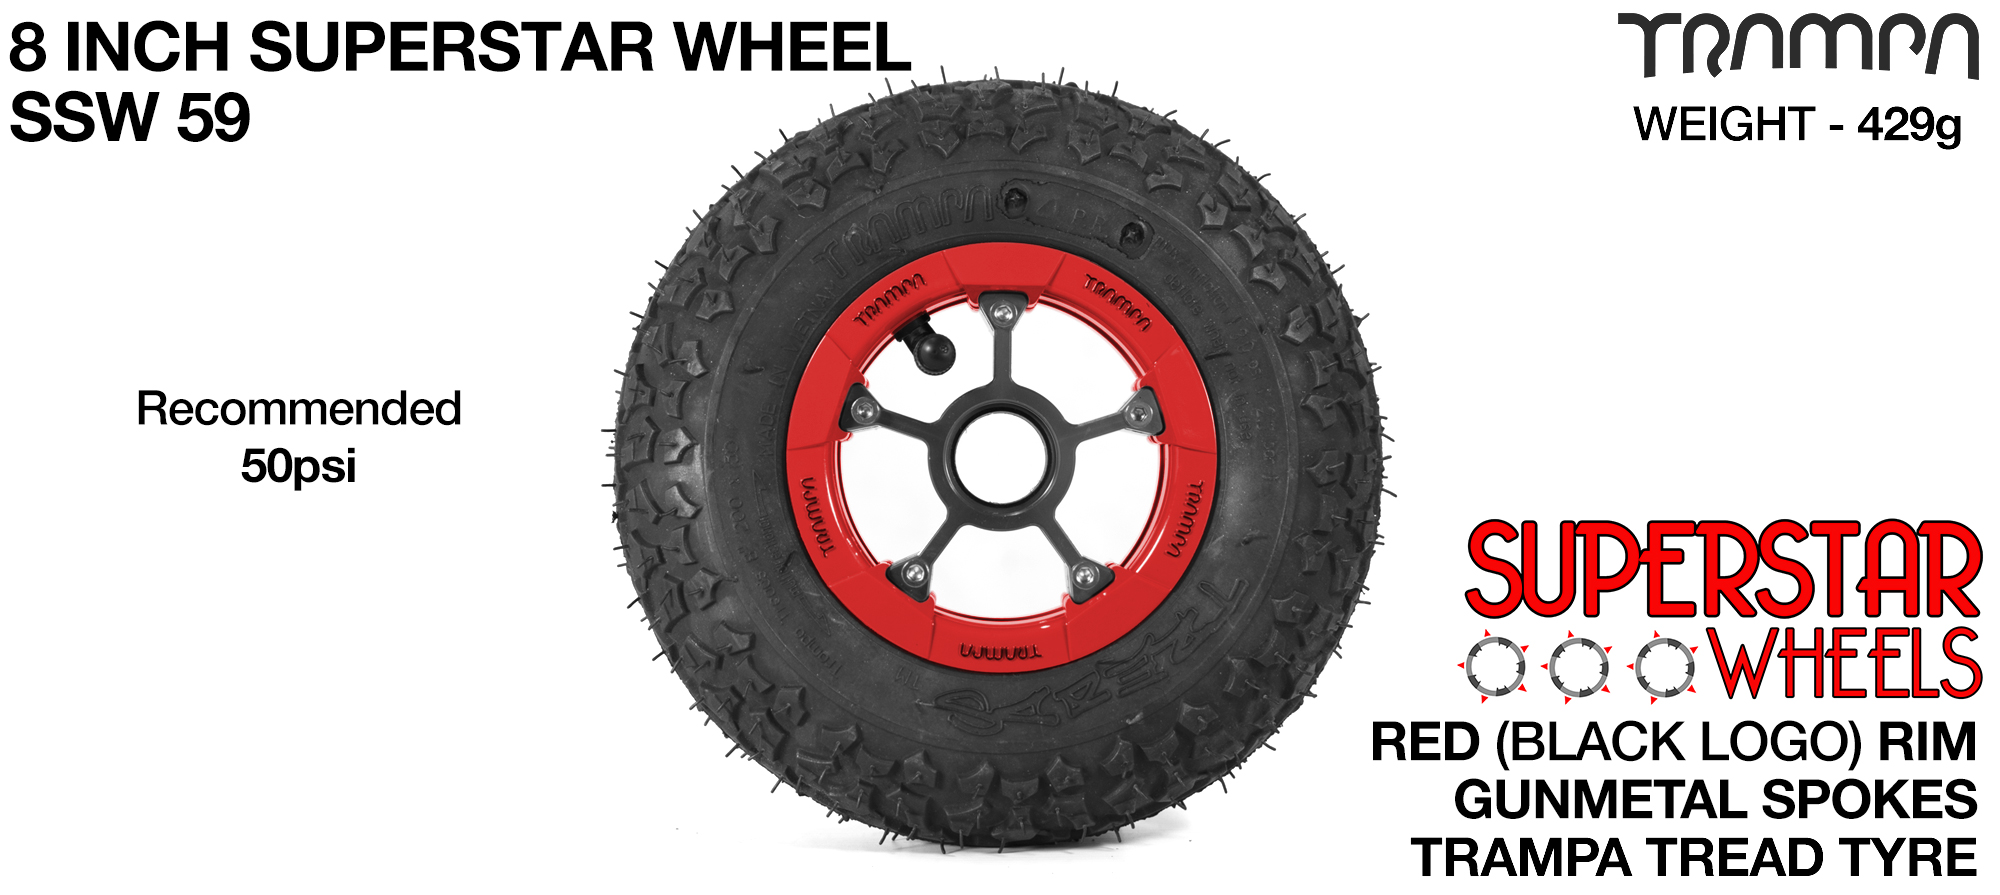 Superstar 8 inch wheel - Red Gloss Rim with Gunmetal Anodised spokes & TRAMPA TREAD 8 Inch Tyres